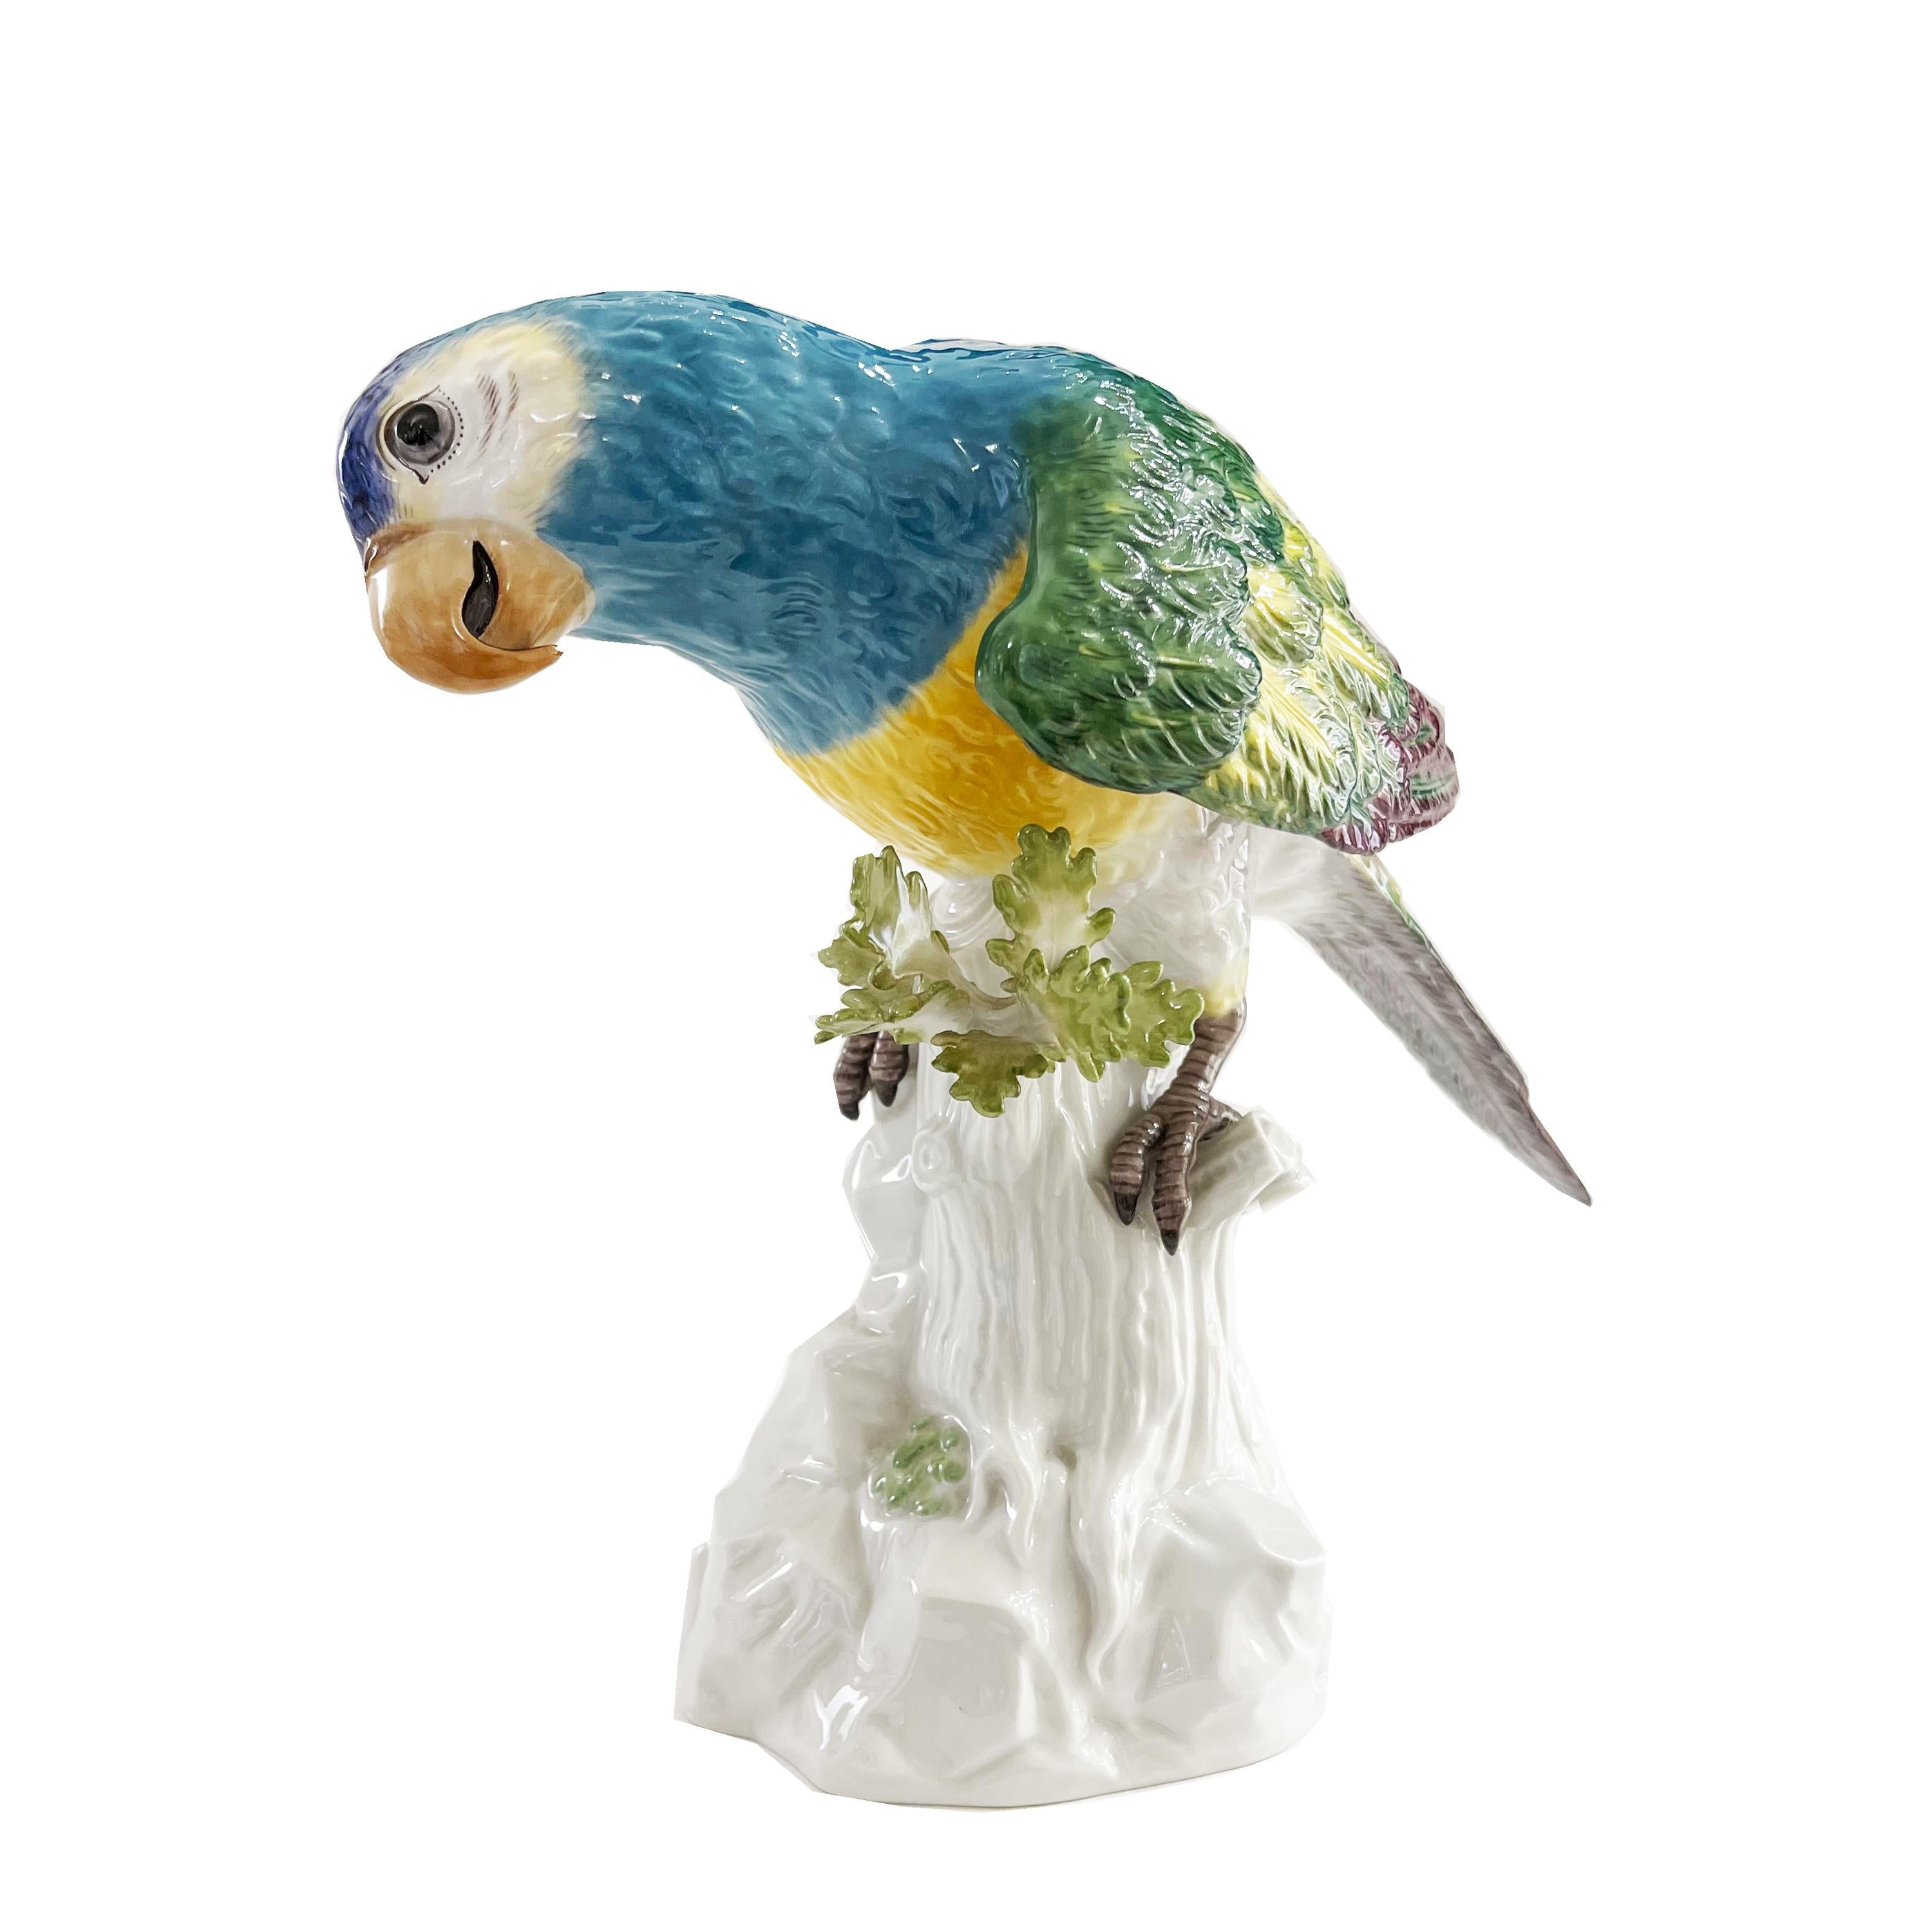 This beautiful parrot was made by the Meissen factory, perhaps the oldest and most prestigious porcelain factory in Europe, using the model created by Kandler in the 1700s.
In 1731 the Meissen manufactory began a new genre in European porcelain,